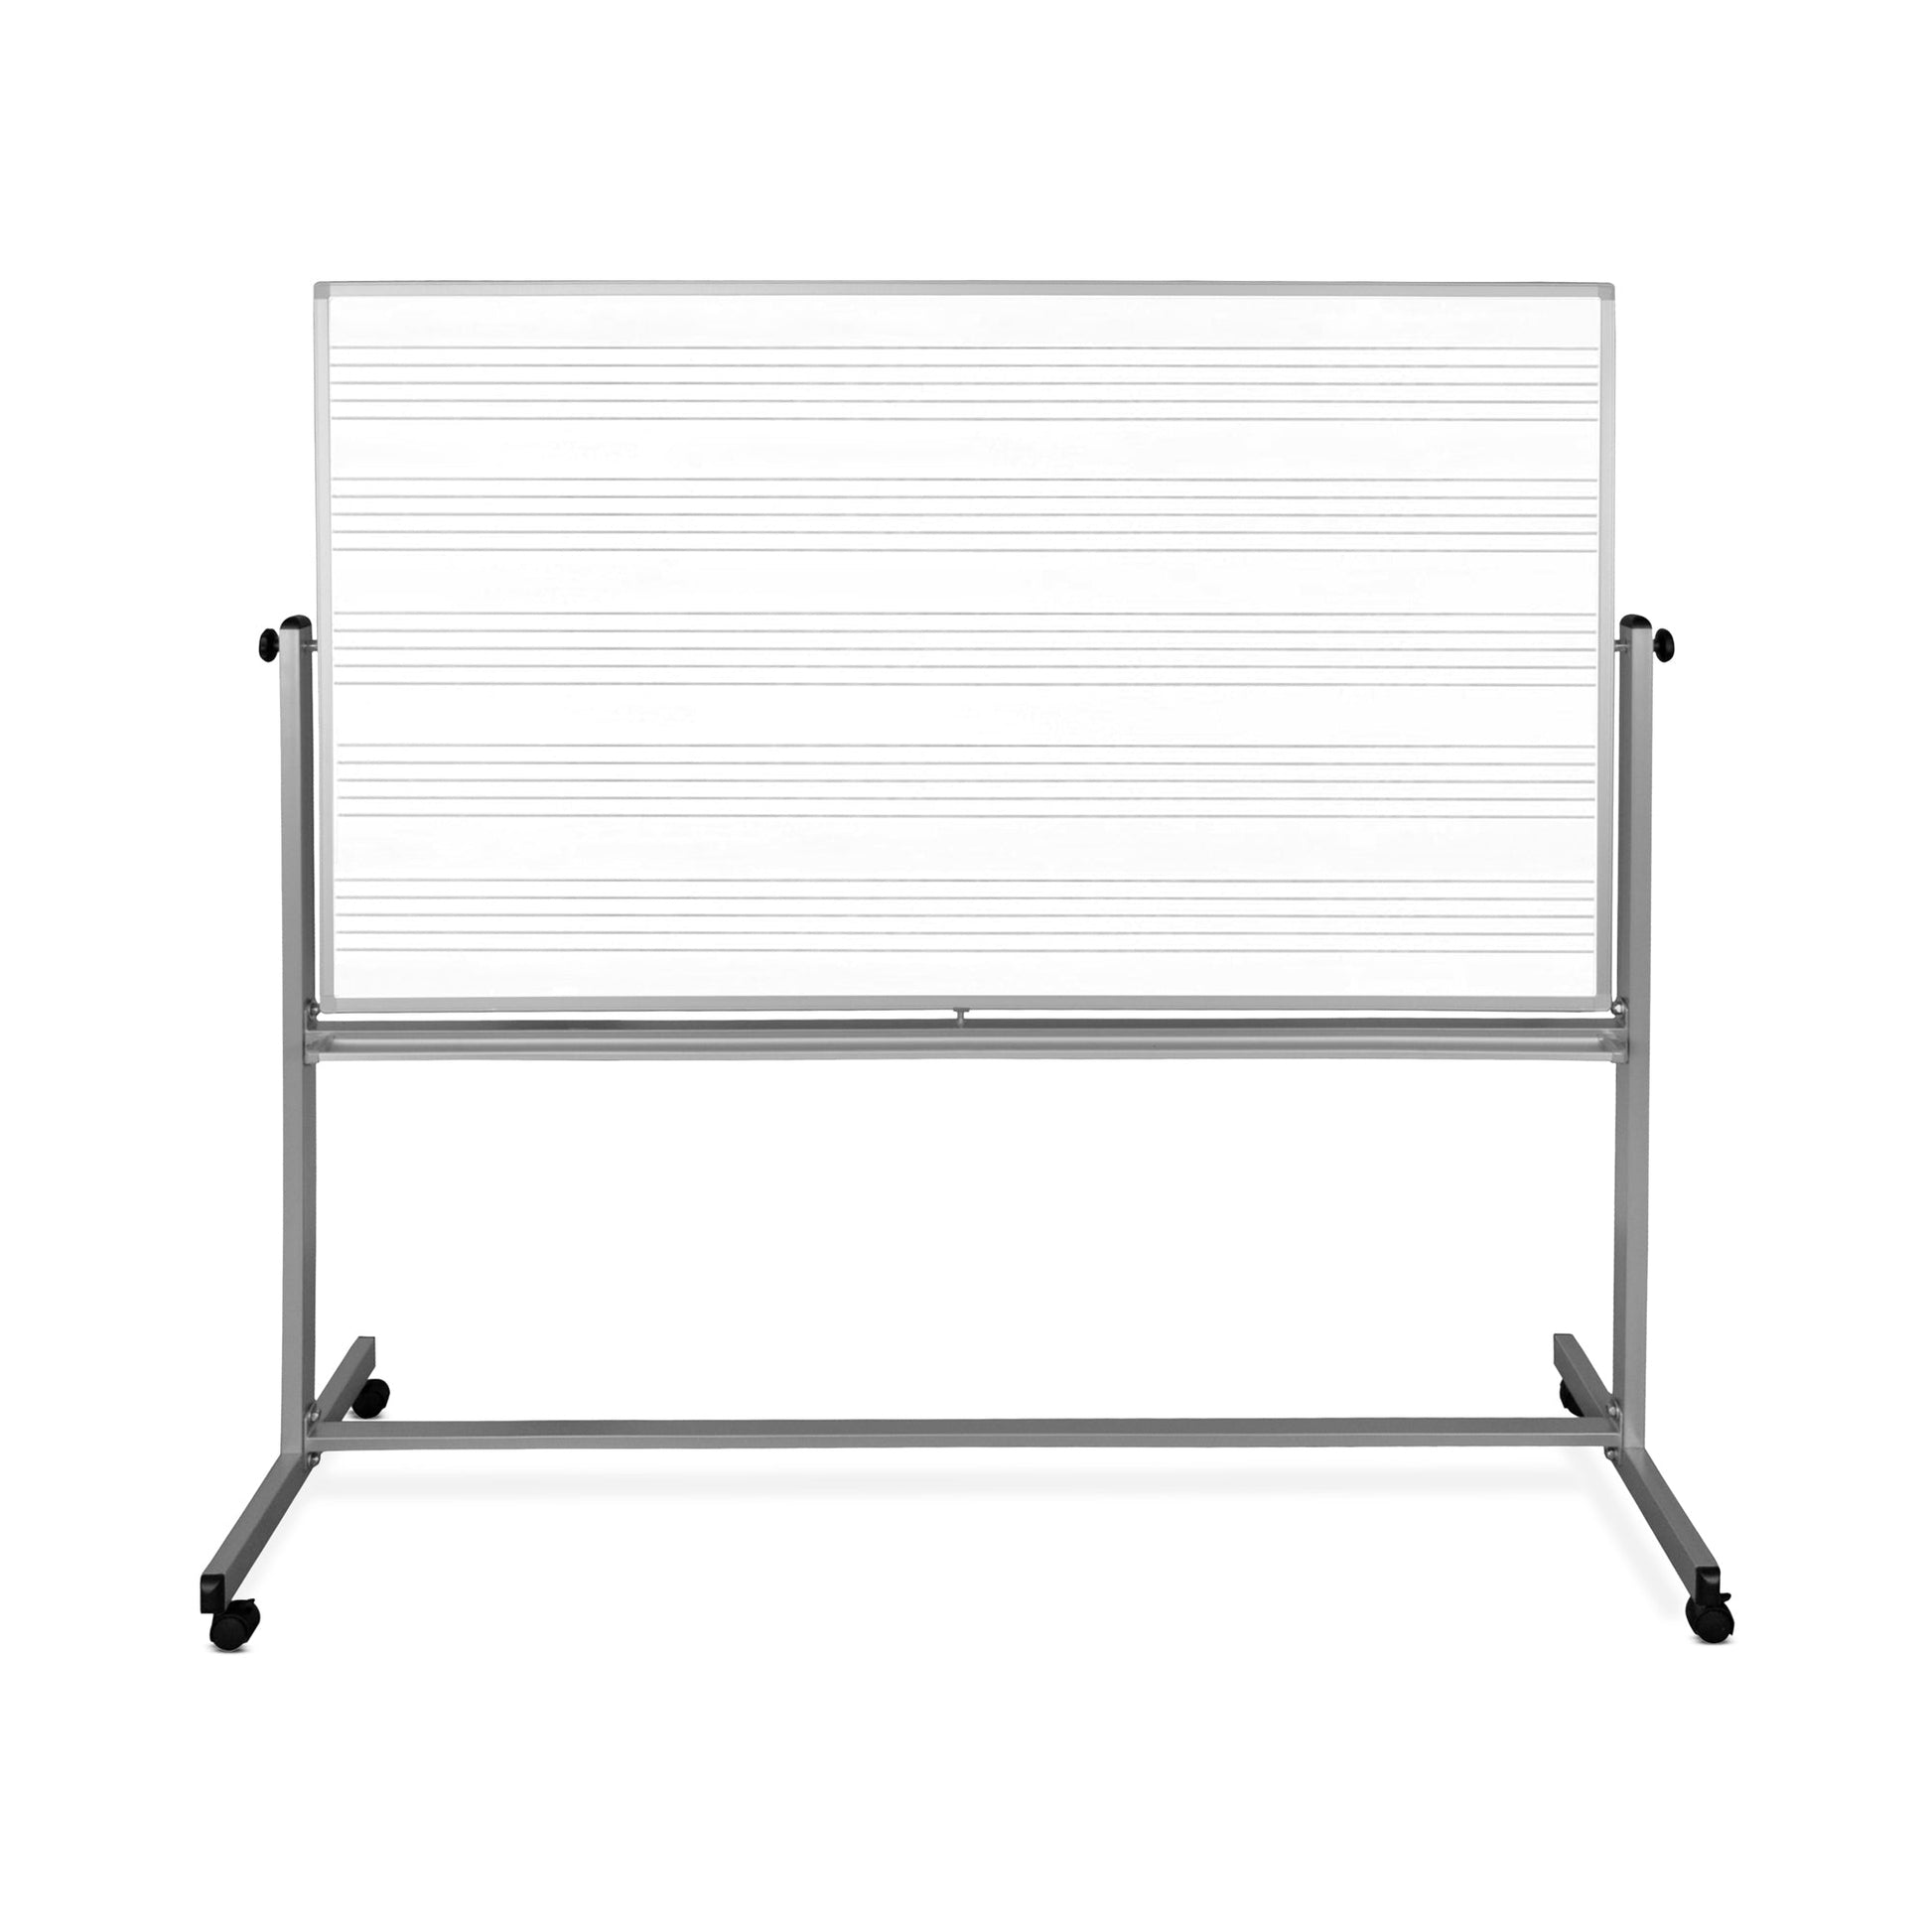 72"W x 48"H Mobile Whiteboard - Double-sided Music&Whiteboard Magnetic dry erase markerboard - Luxor MB7248MW - SchoolOutlet